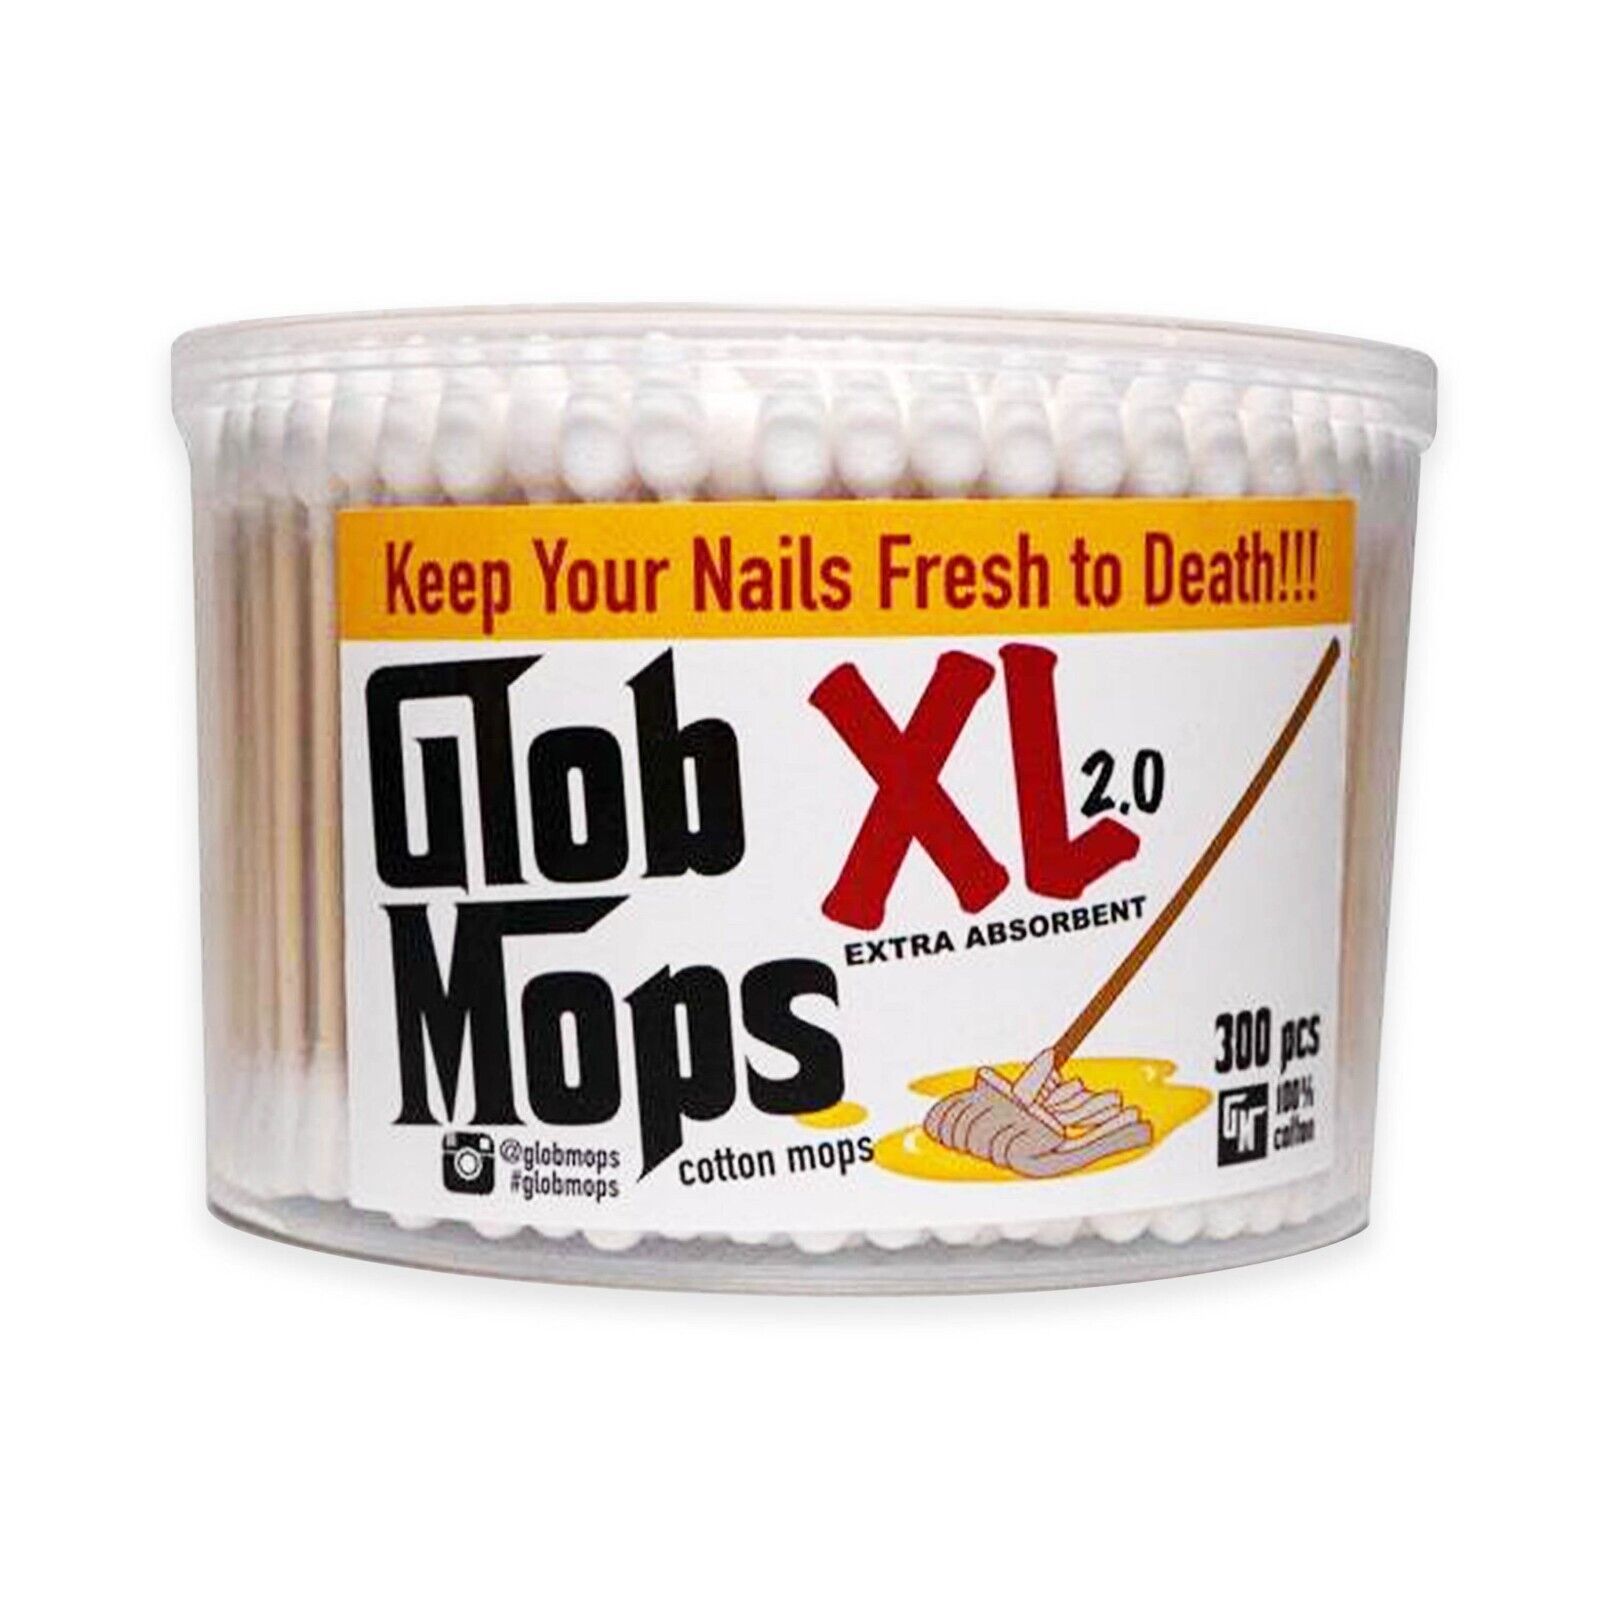 Glob Mops XL 2.0 - Pack of 300